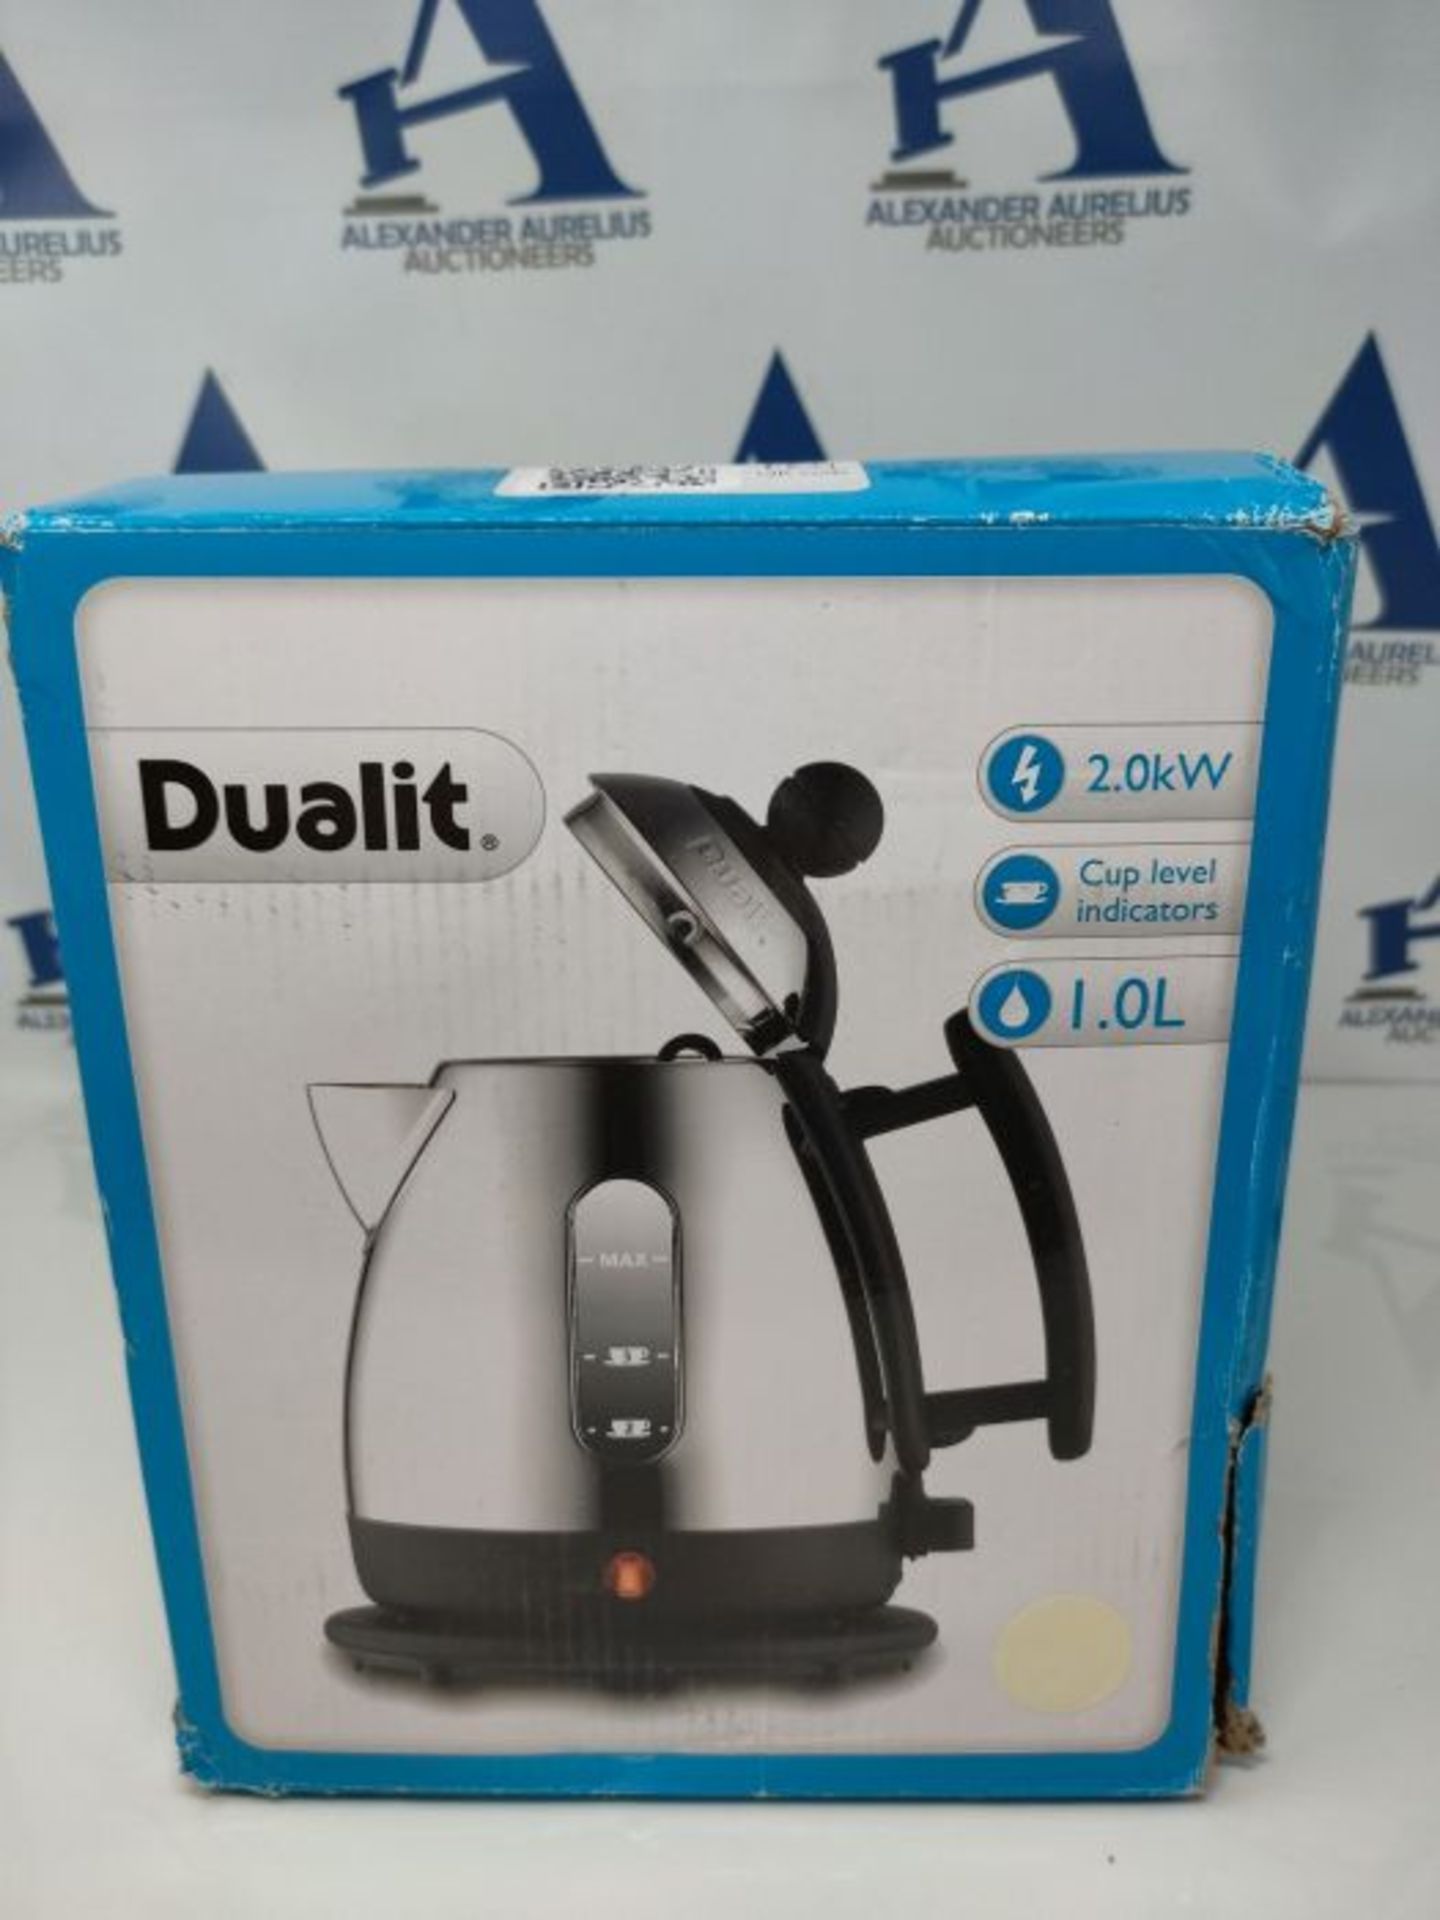 Dualit Lite Kettle | 1 L 2 kW Jug Kettle | Polished with Canvas White Trim, High Gloss - Image 2 of 3